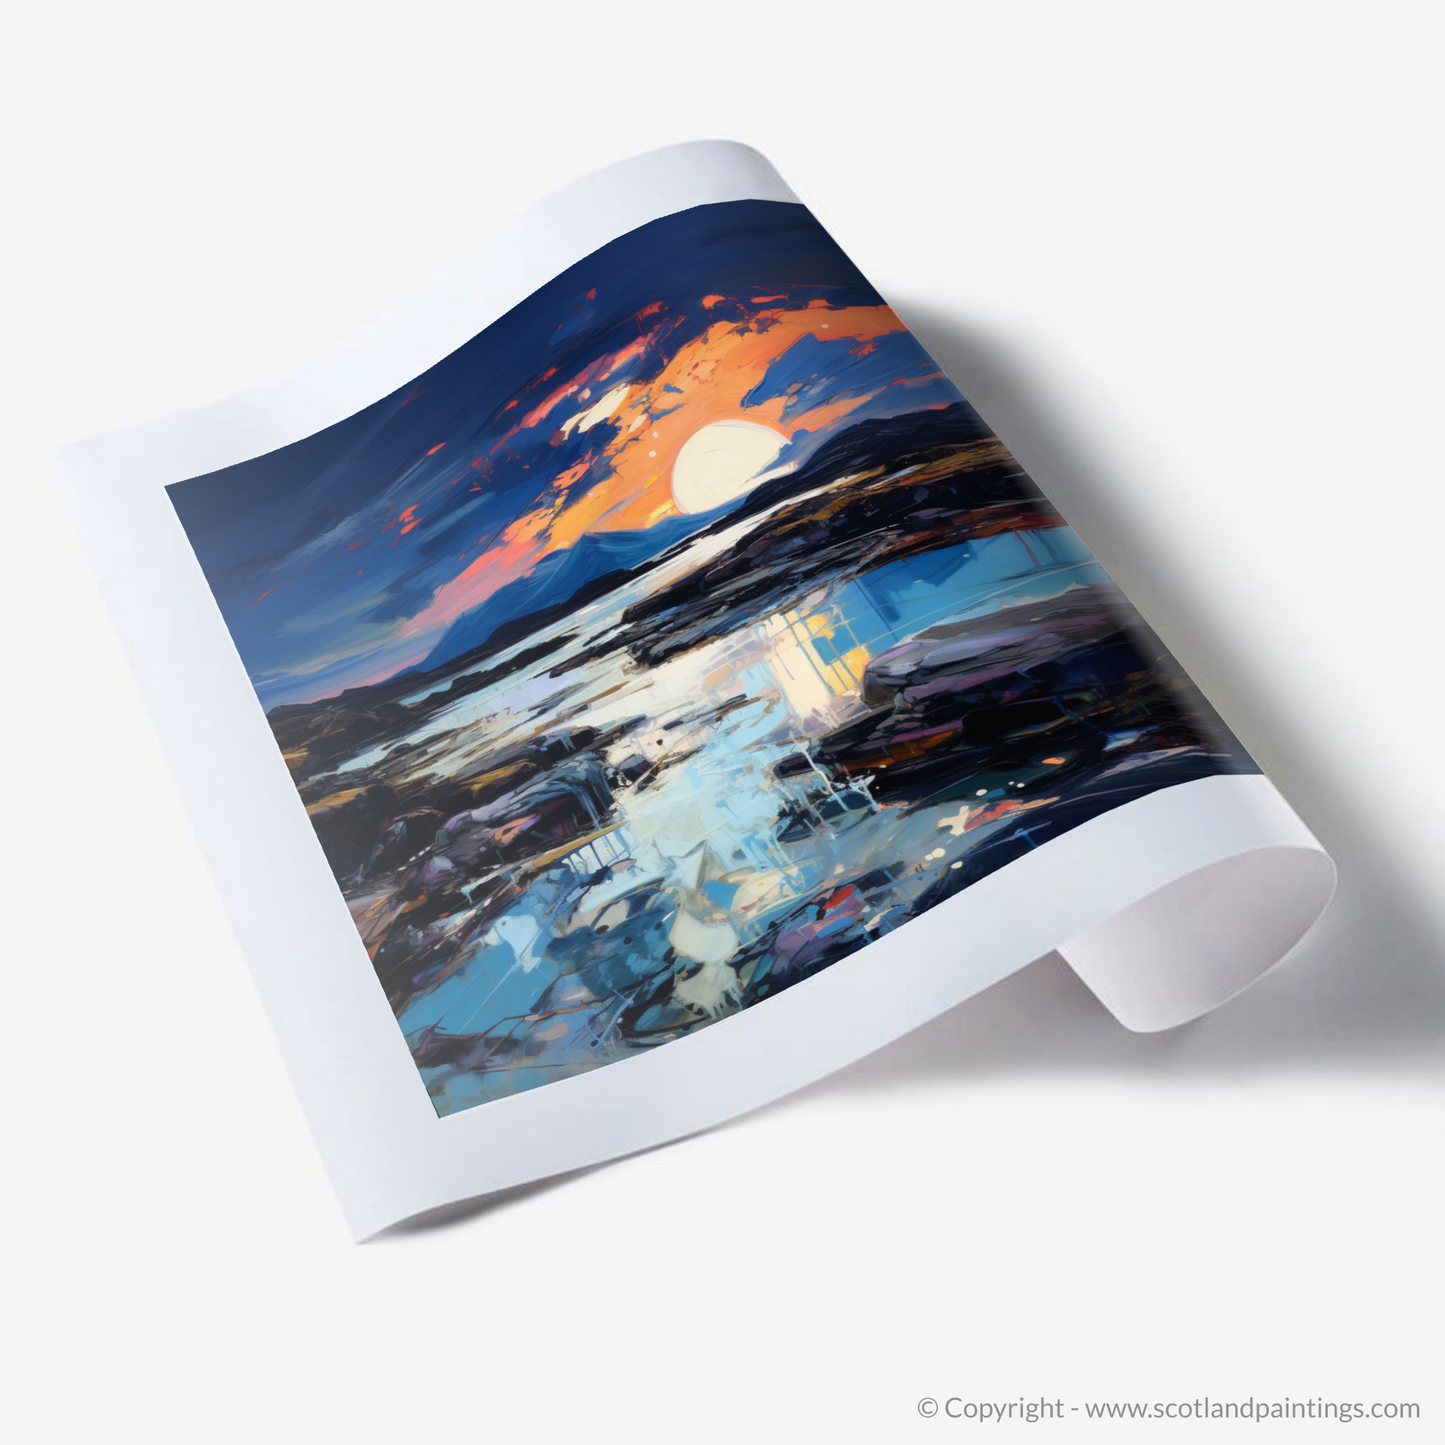 Painting and Art Print of Sound of Iona at dusk. Dusk's Embrace at Sound of Iona.